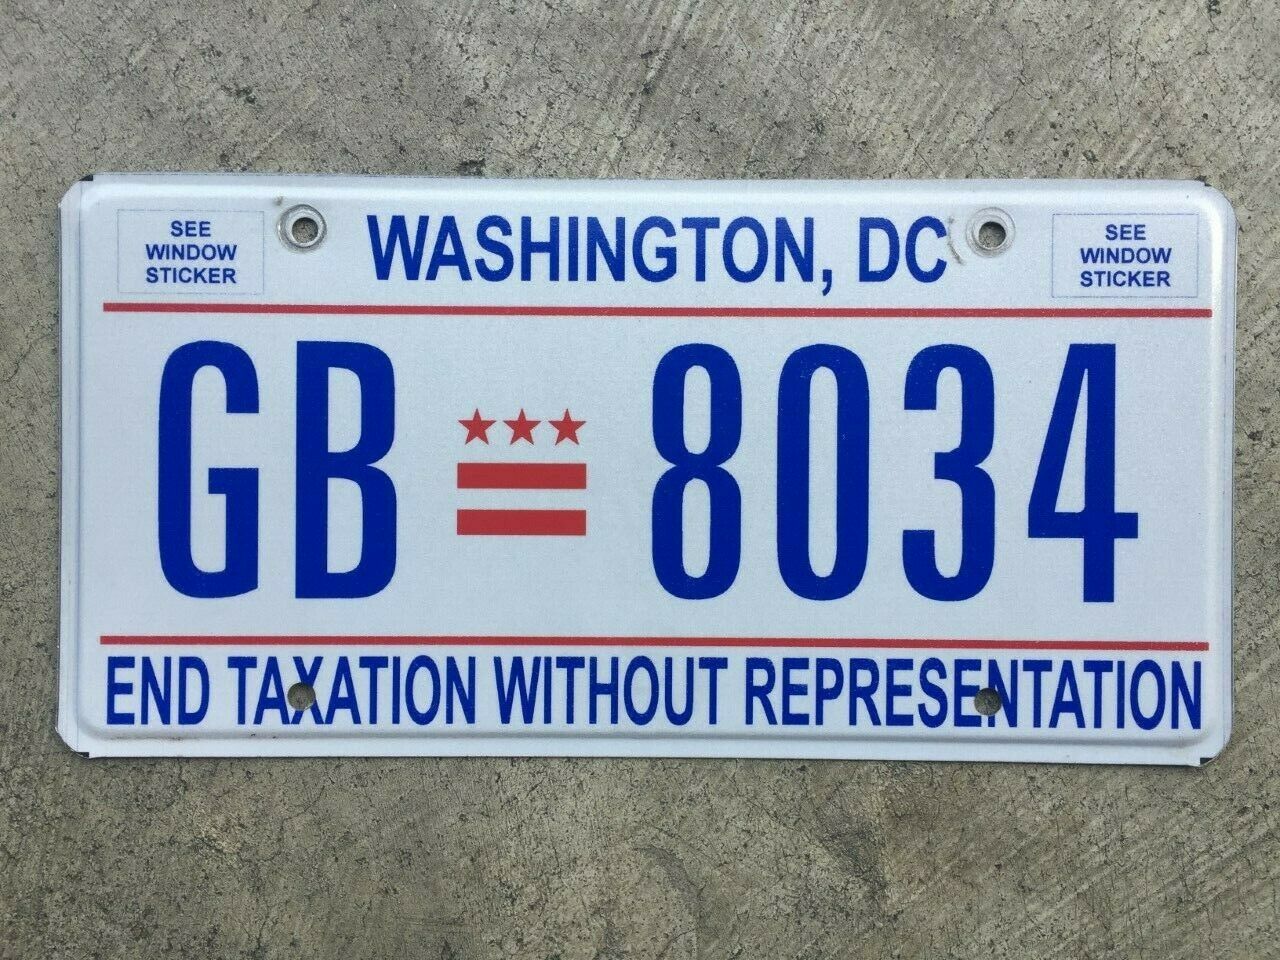 Washington Dc End Taxation License Plate Tag - Nice Gb 8034 District Of Columbia